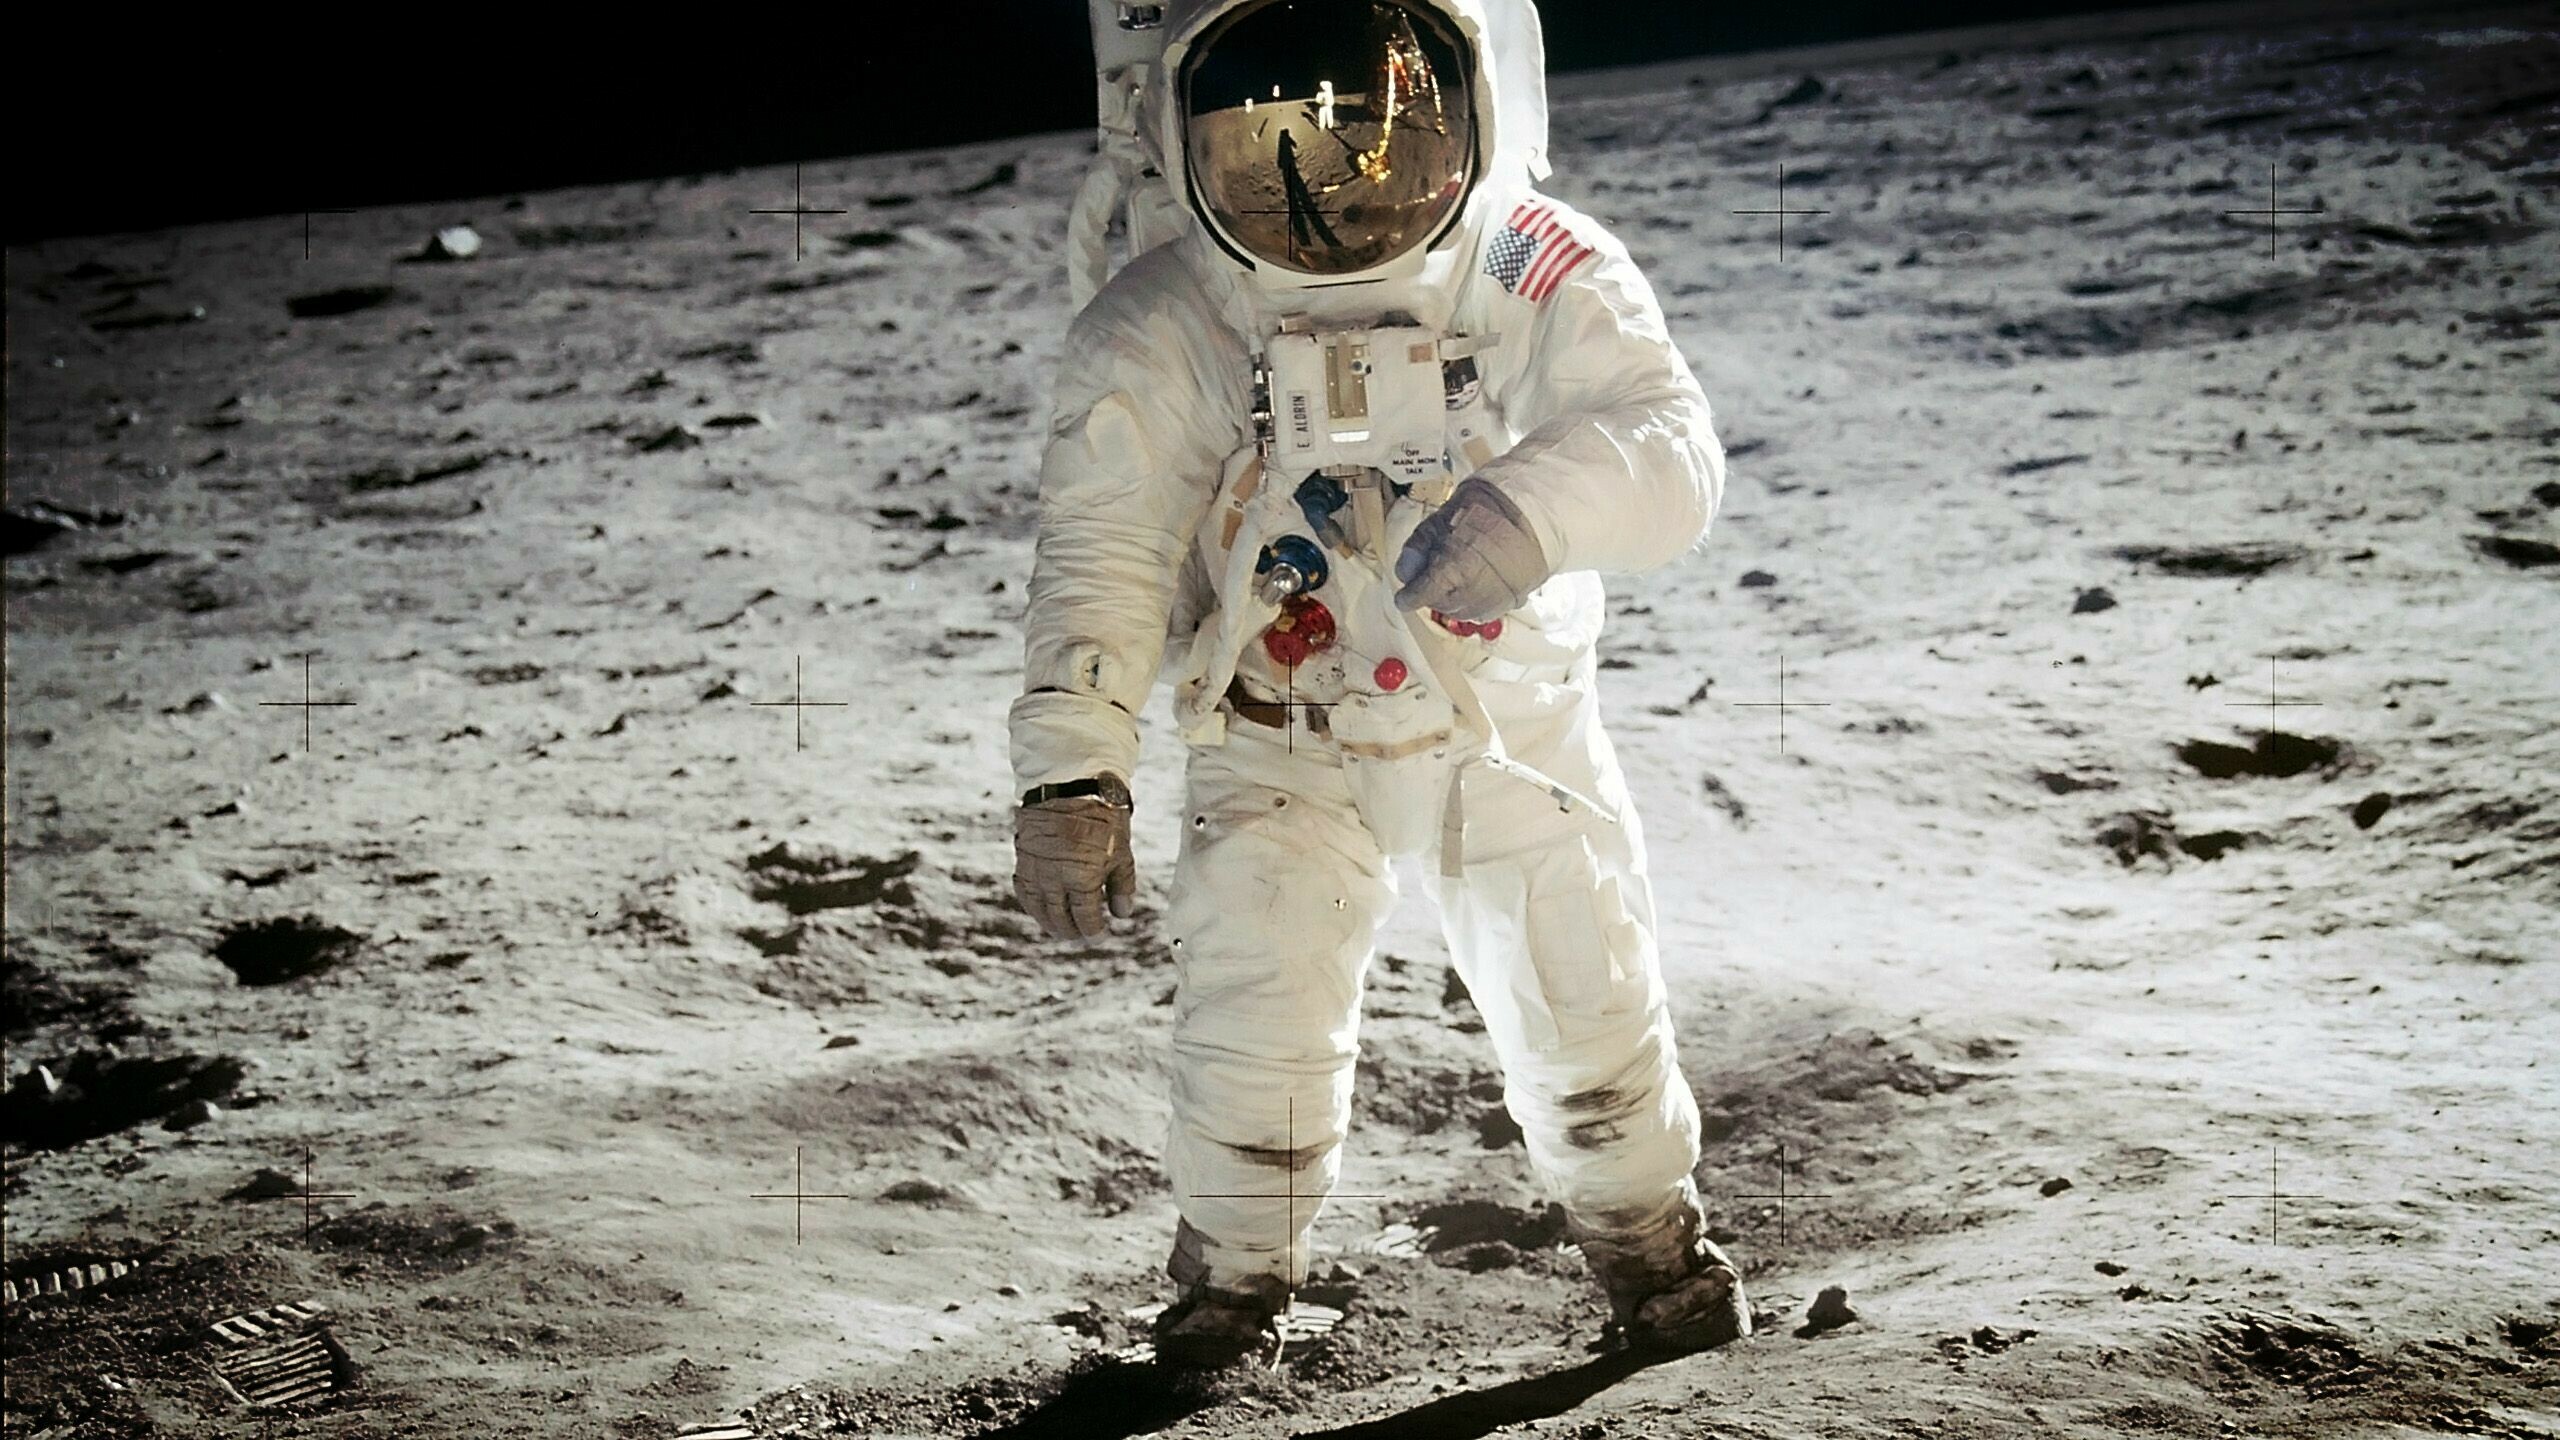 Man on the Moon: Neil Armstrong and Buzz Aldrin landed the Apollo Lunar Module Eagle on July 20, 1969. 2560x1440 HD Background.